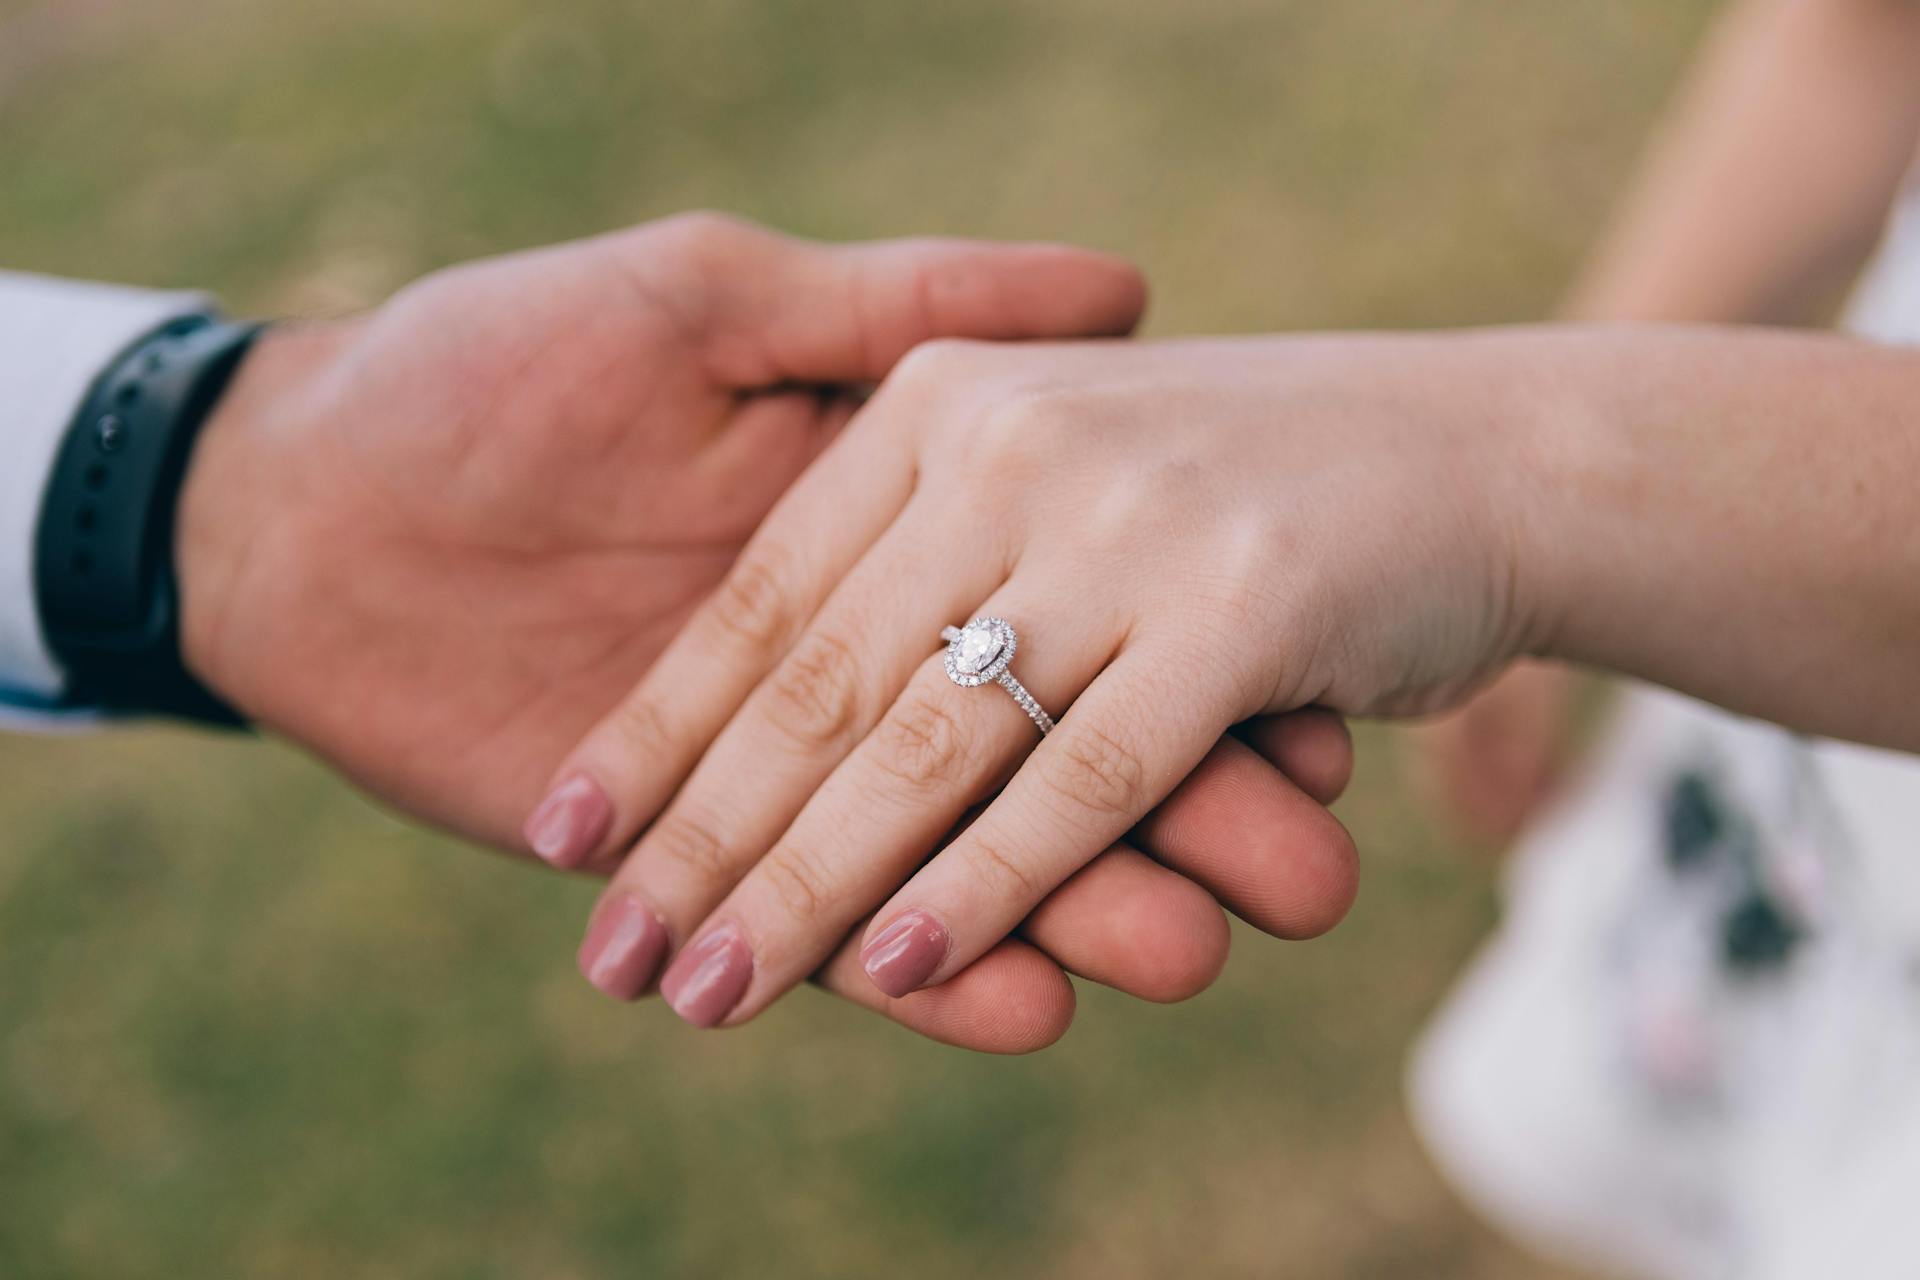 A man holding his fiancée's hand showing her engagement ring | Source: Pexels